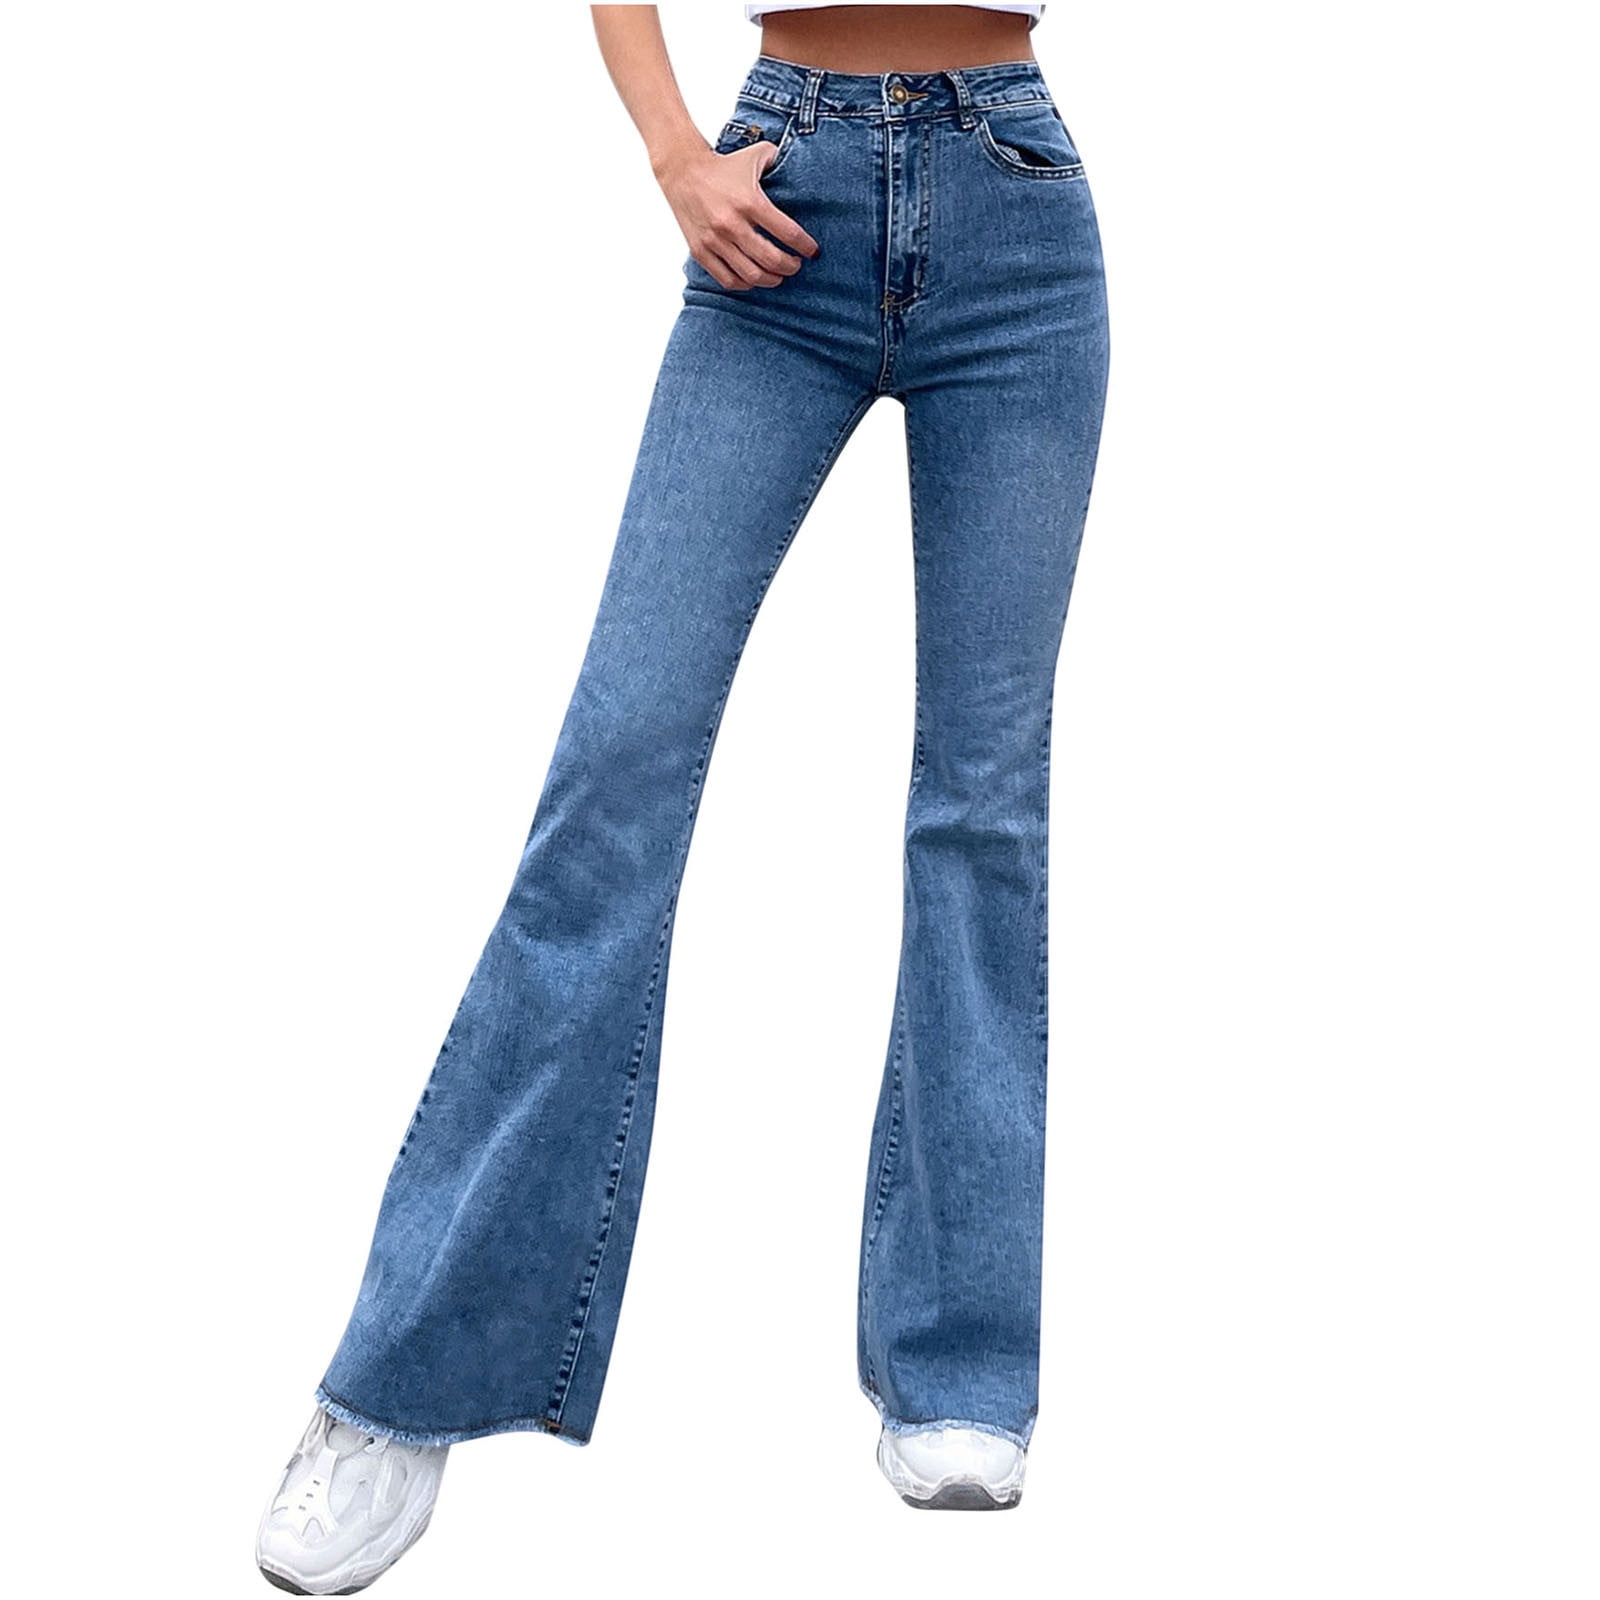 Bigersell Ripped High Waist Jeans for Women Full Length Pants Jeans Women  Fashion High Waist Wide Leg Stretch Thin Stitching Denim Flared Pants